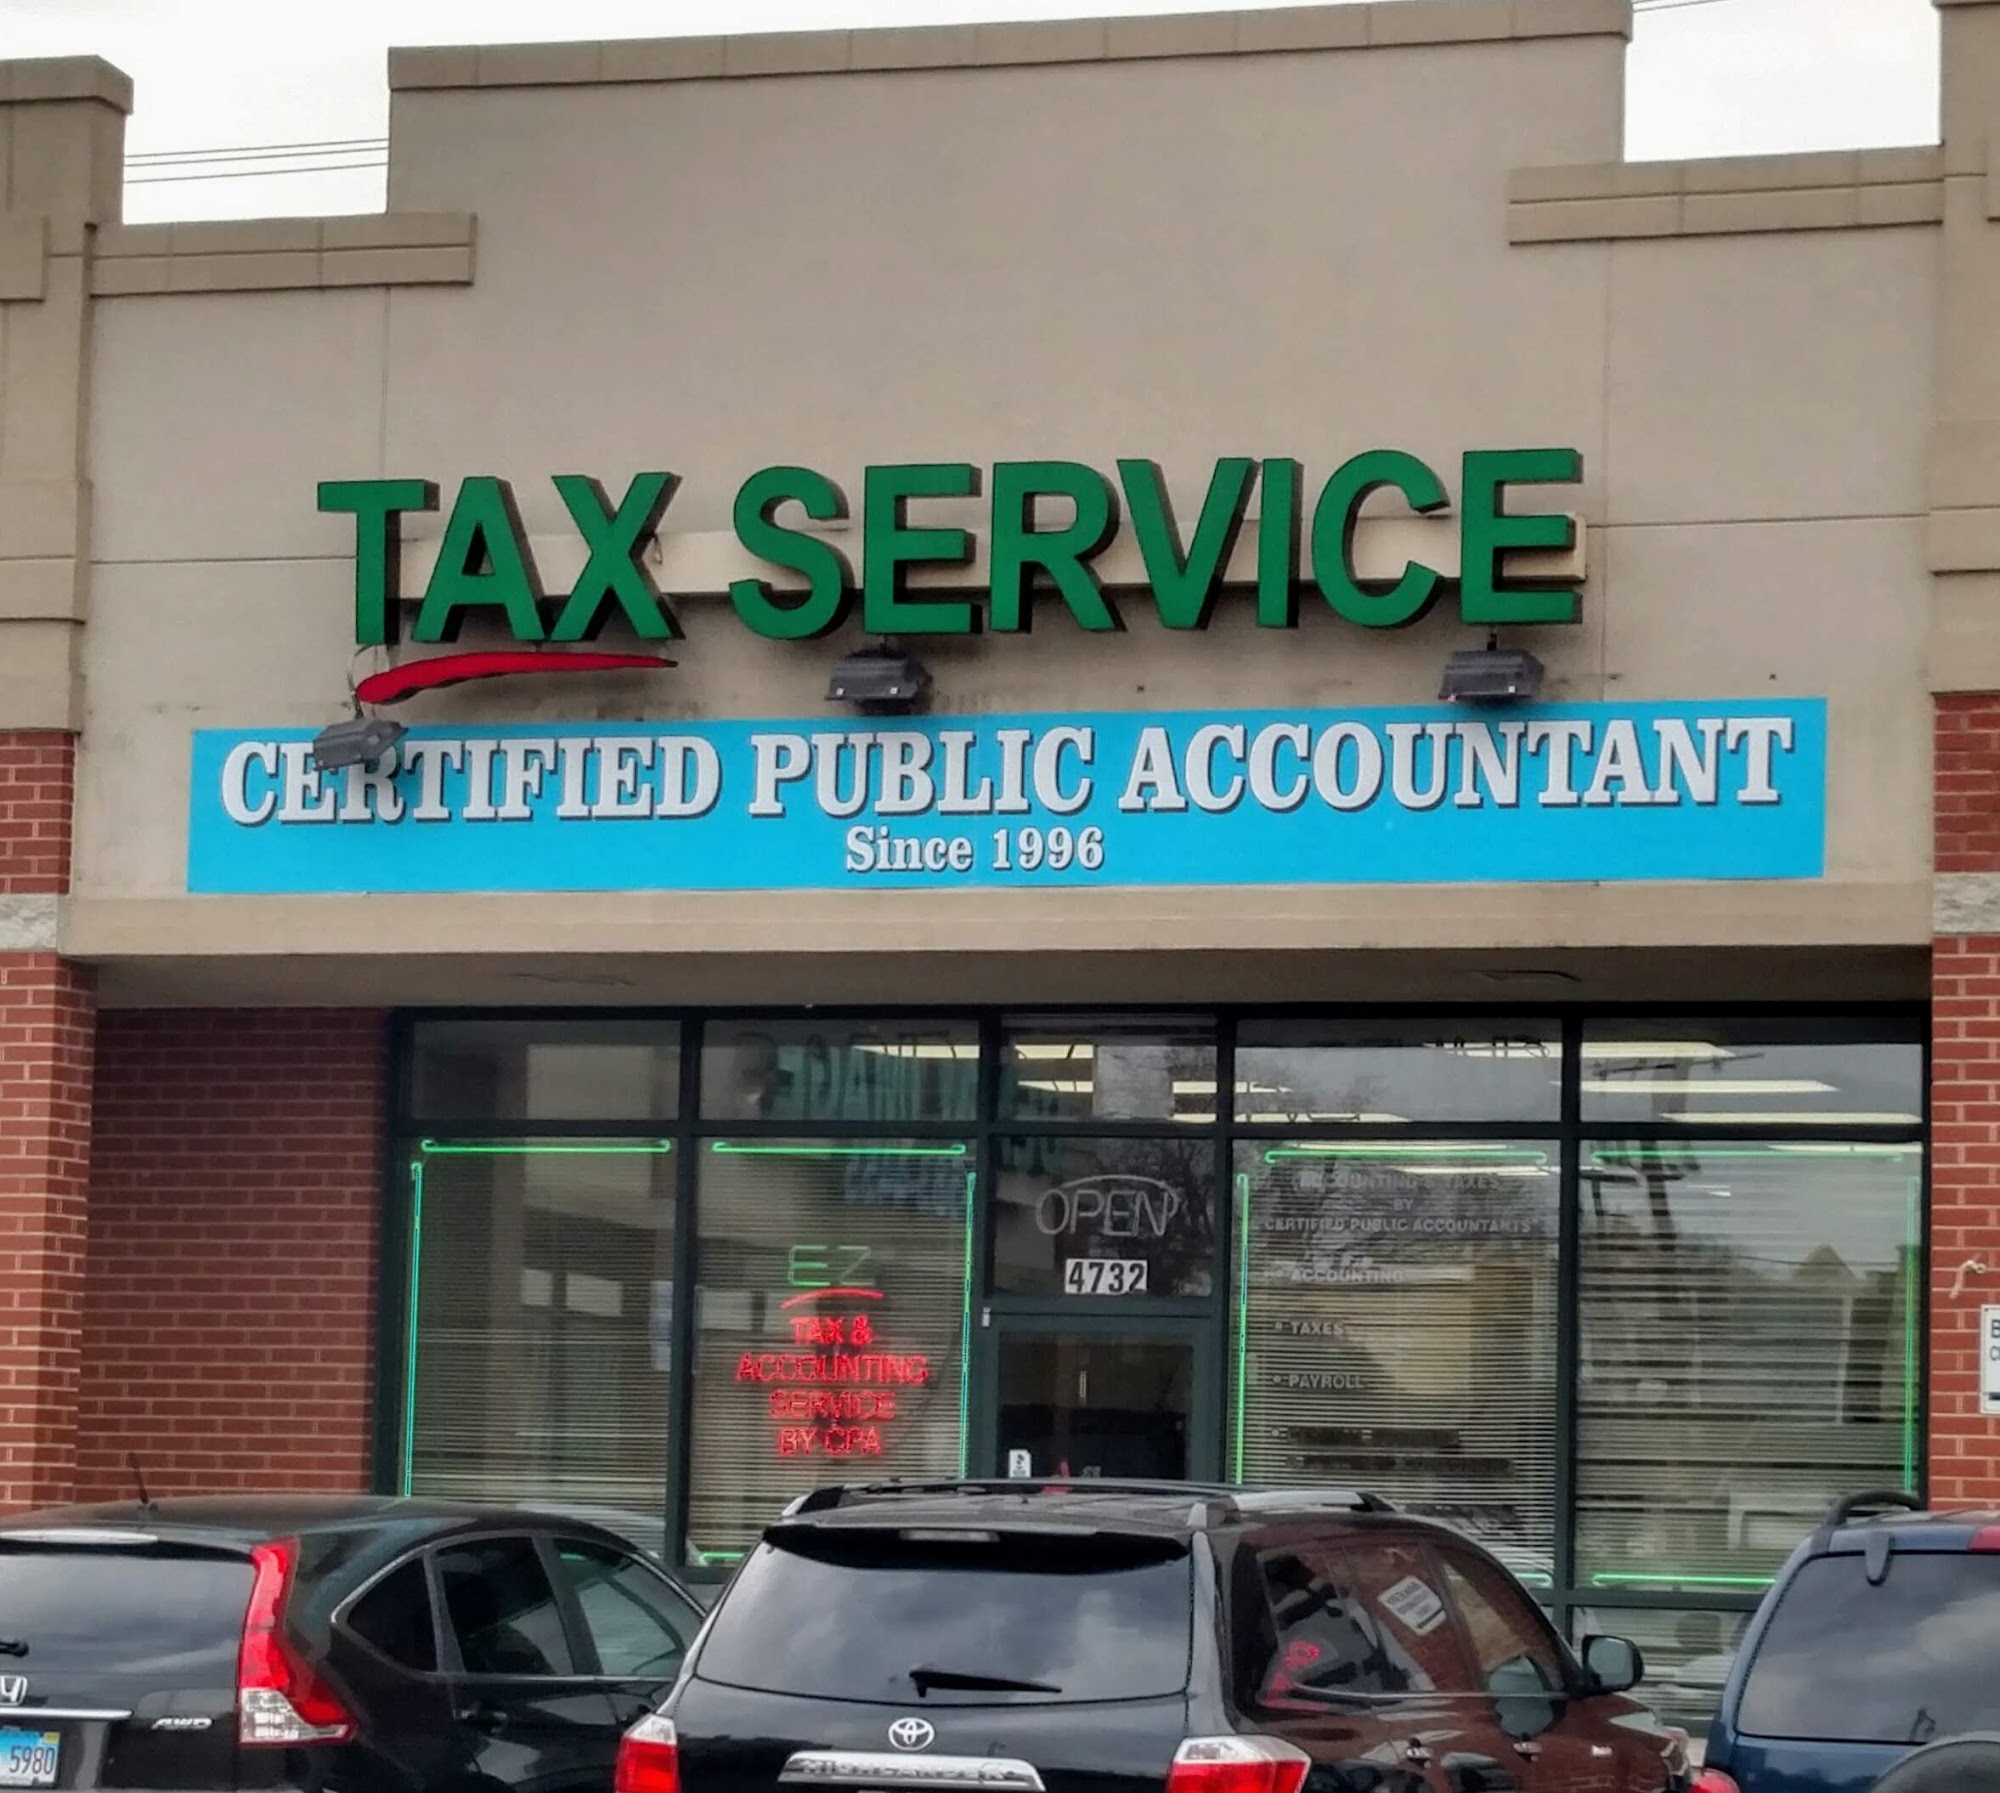 EZ Tax and Accounting Service, Inc.